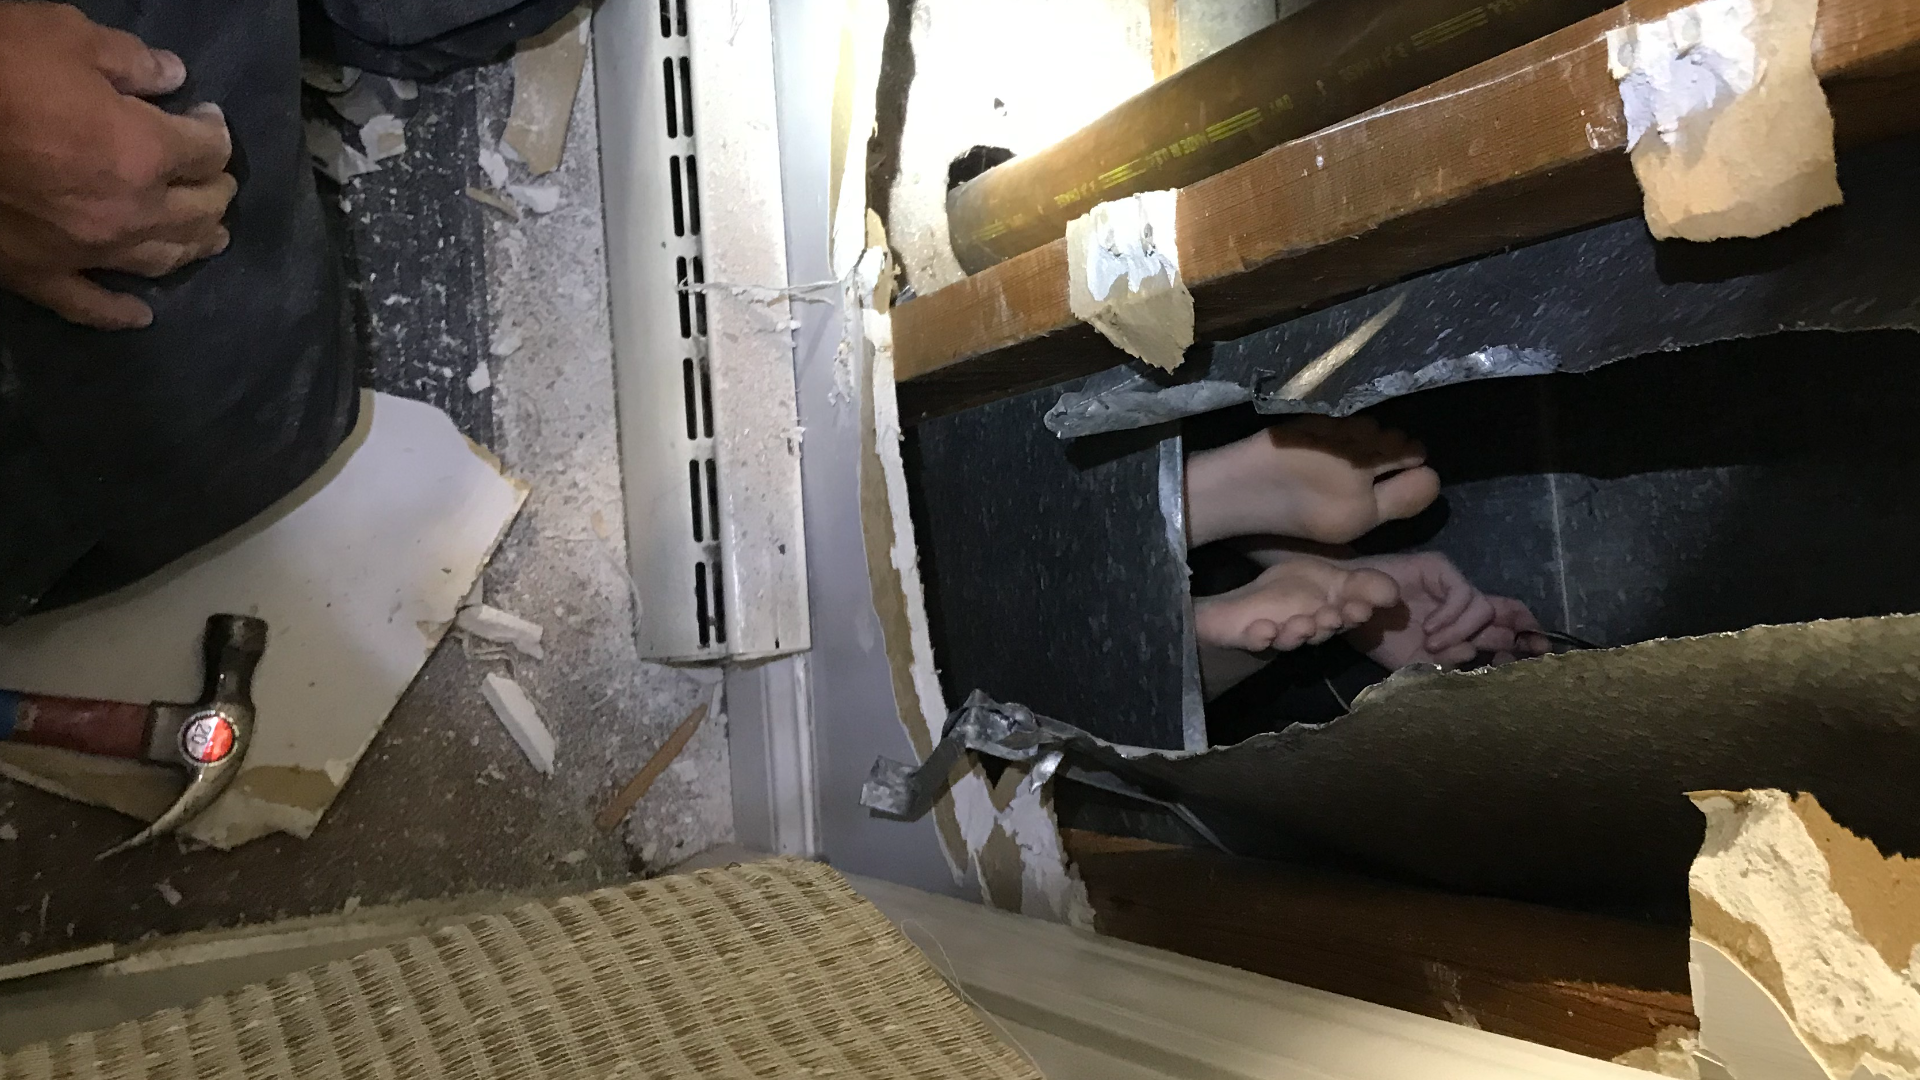 Firefighters had to rescue an 8-year-old from a laundry chute after he got stuck while trying to slide to the basement.